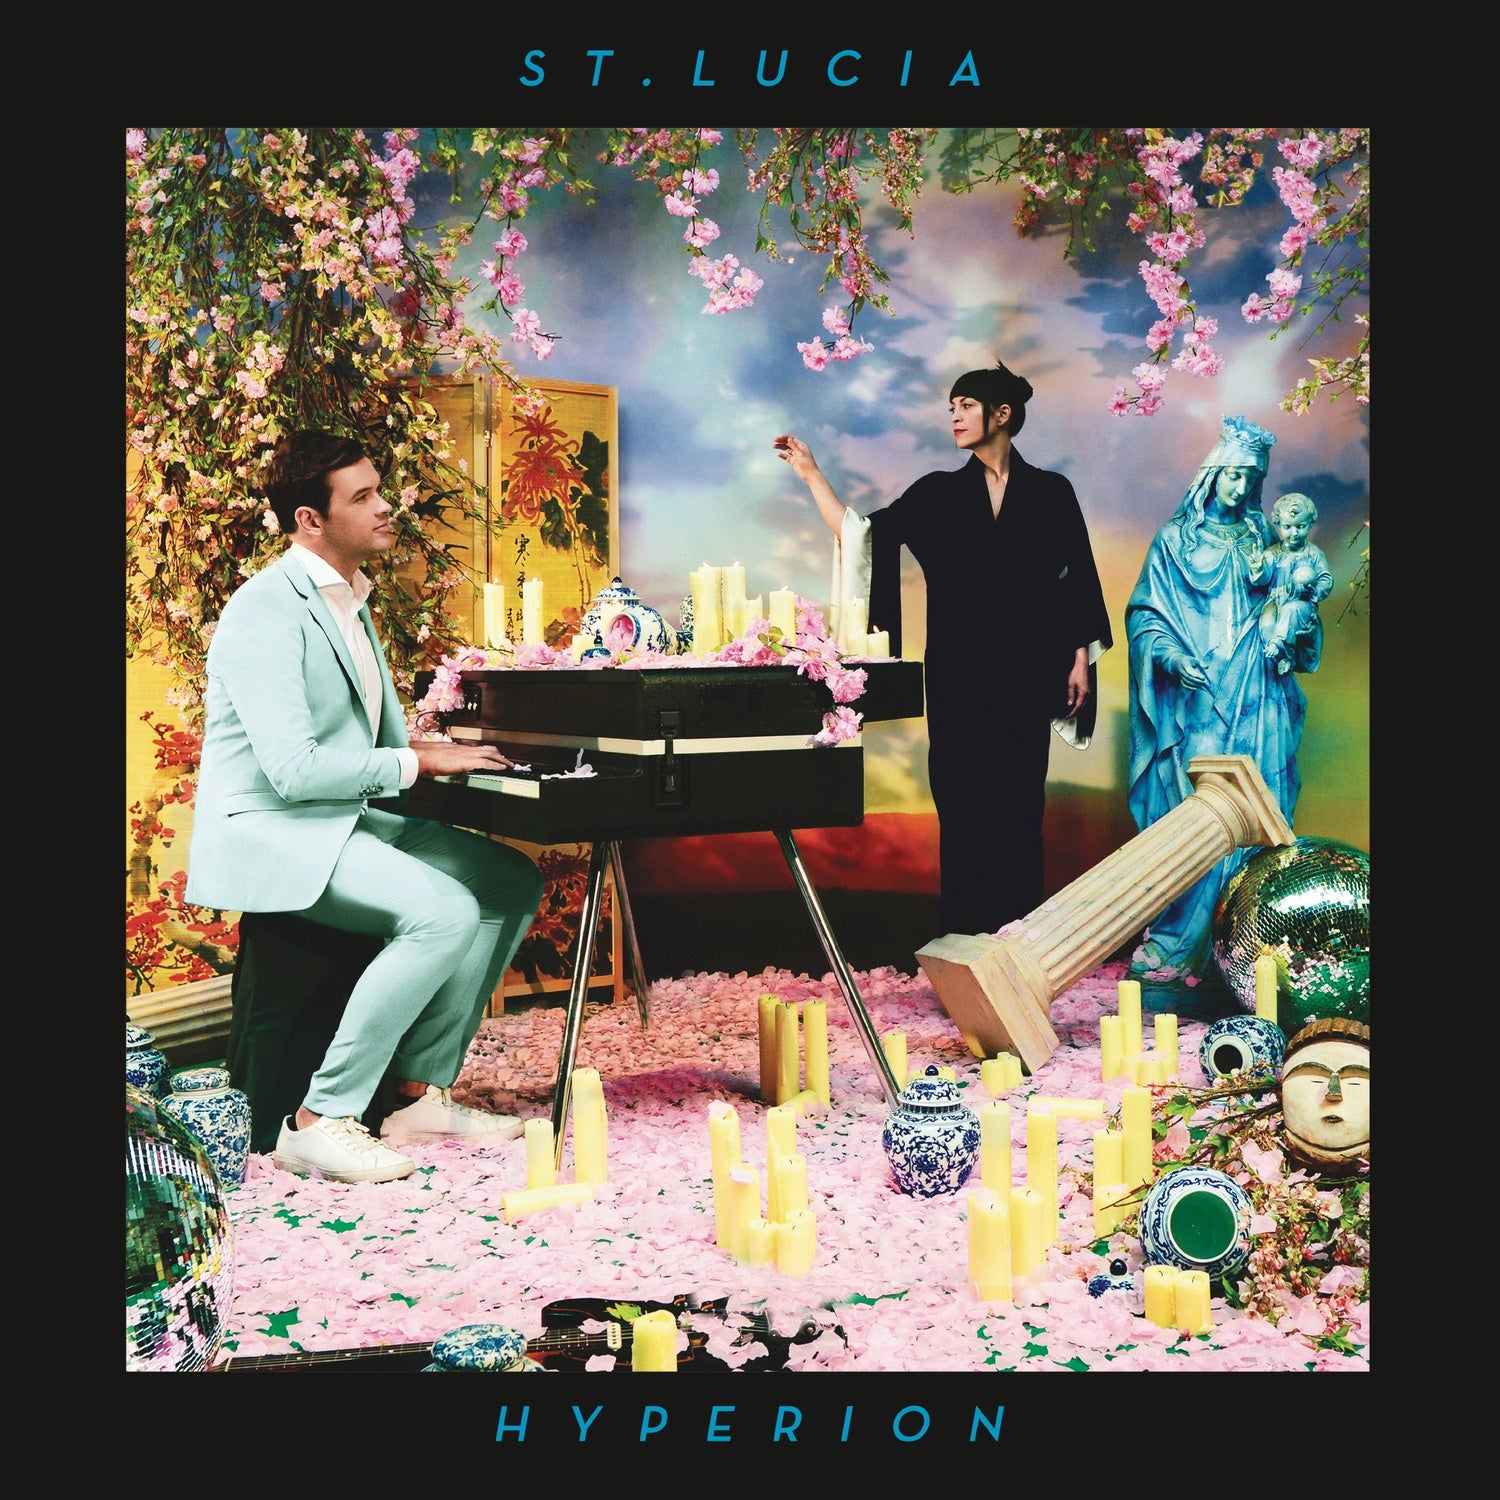 St. Lucia - Hyperion - New Vinyl 2 Lp 2018 Columbia - Synth-pop / Indie Rock / Electronic